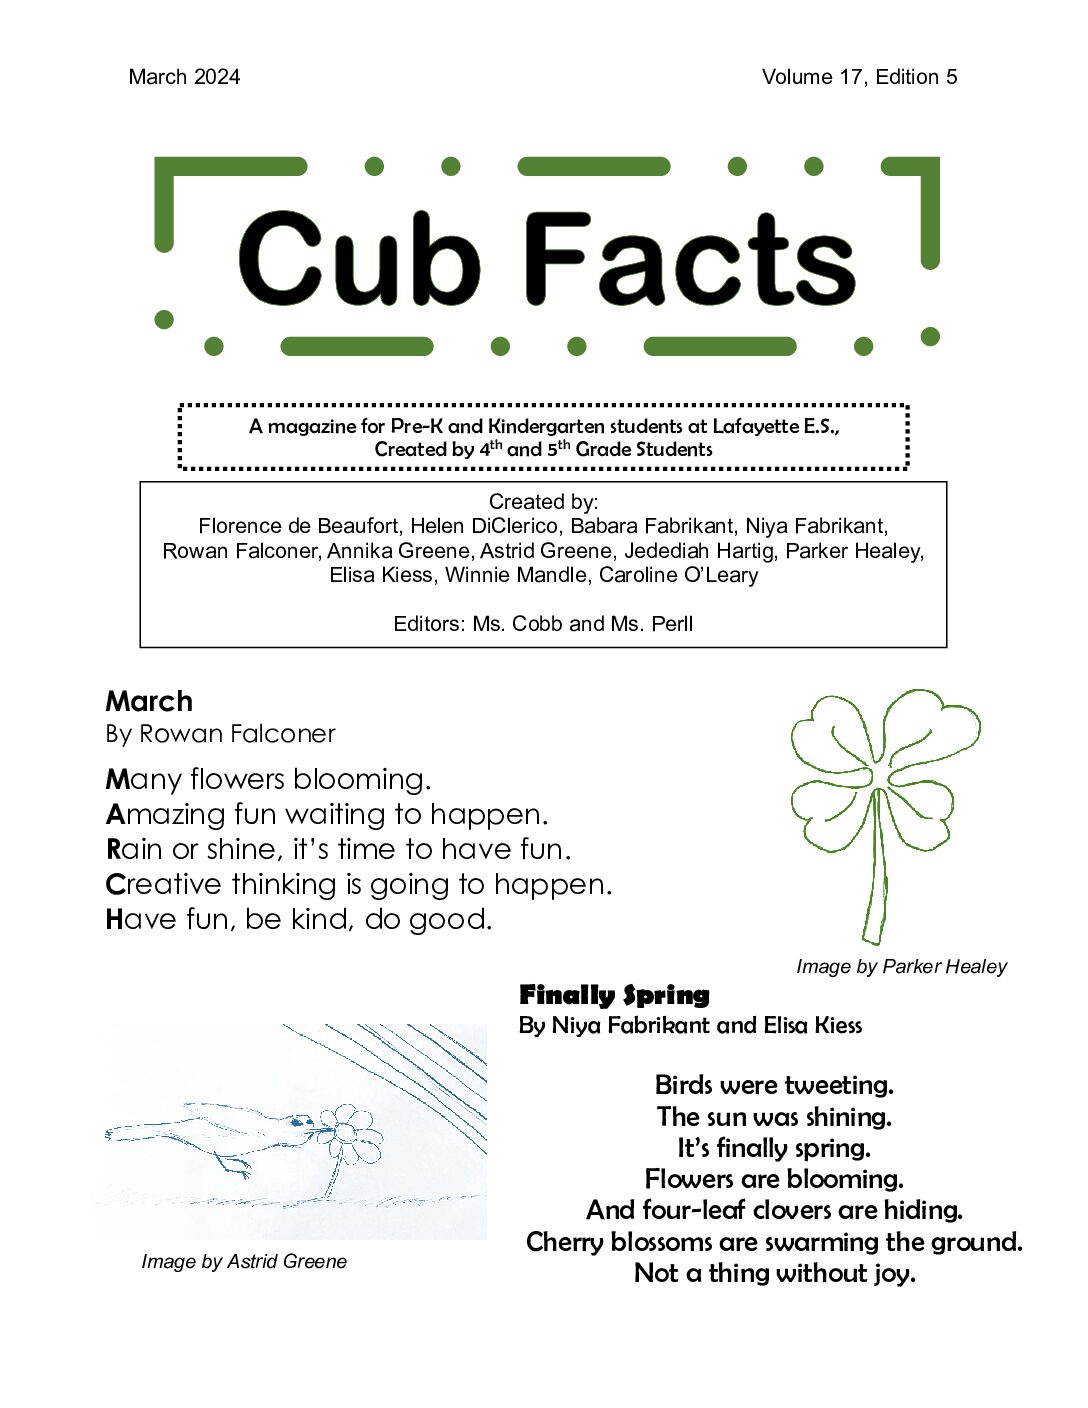 March Cub Facts is here!